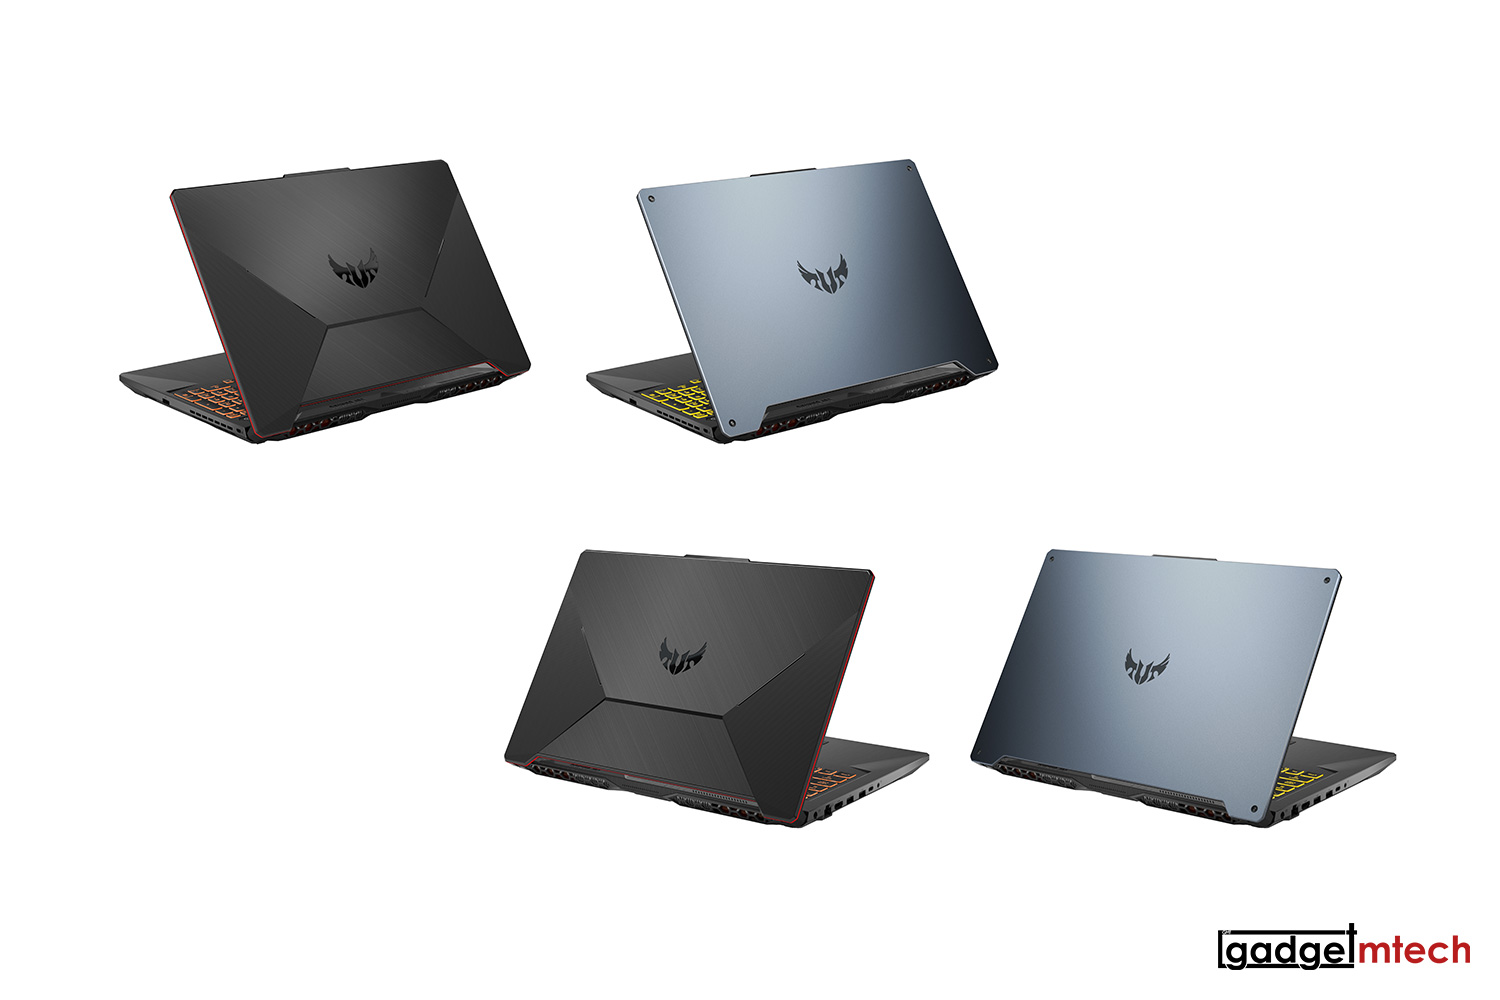 ASUS Announces New TUF Gaming Laptops at CES 2020